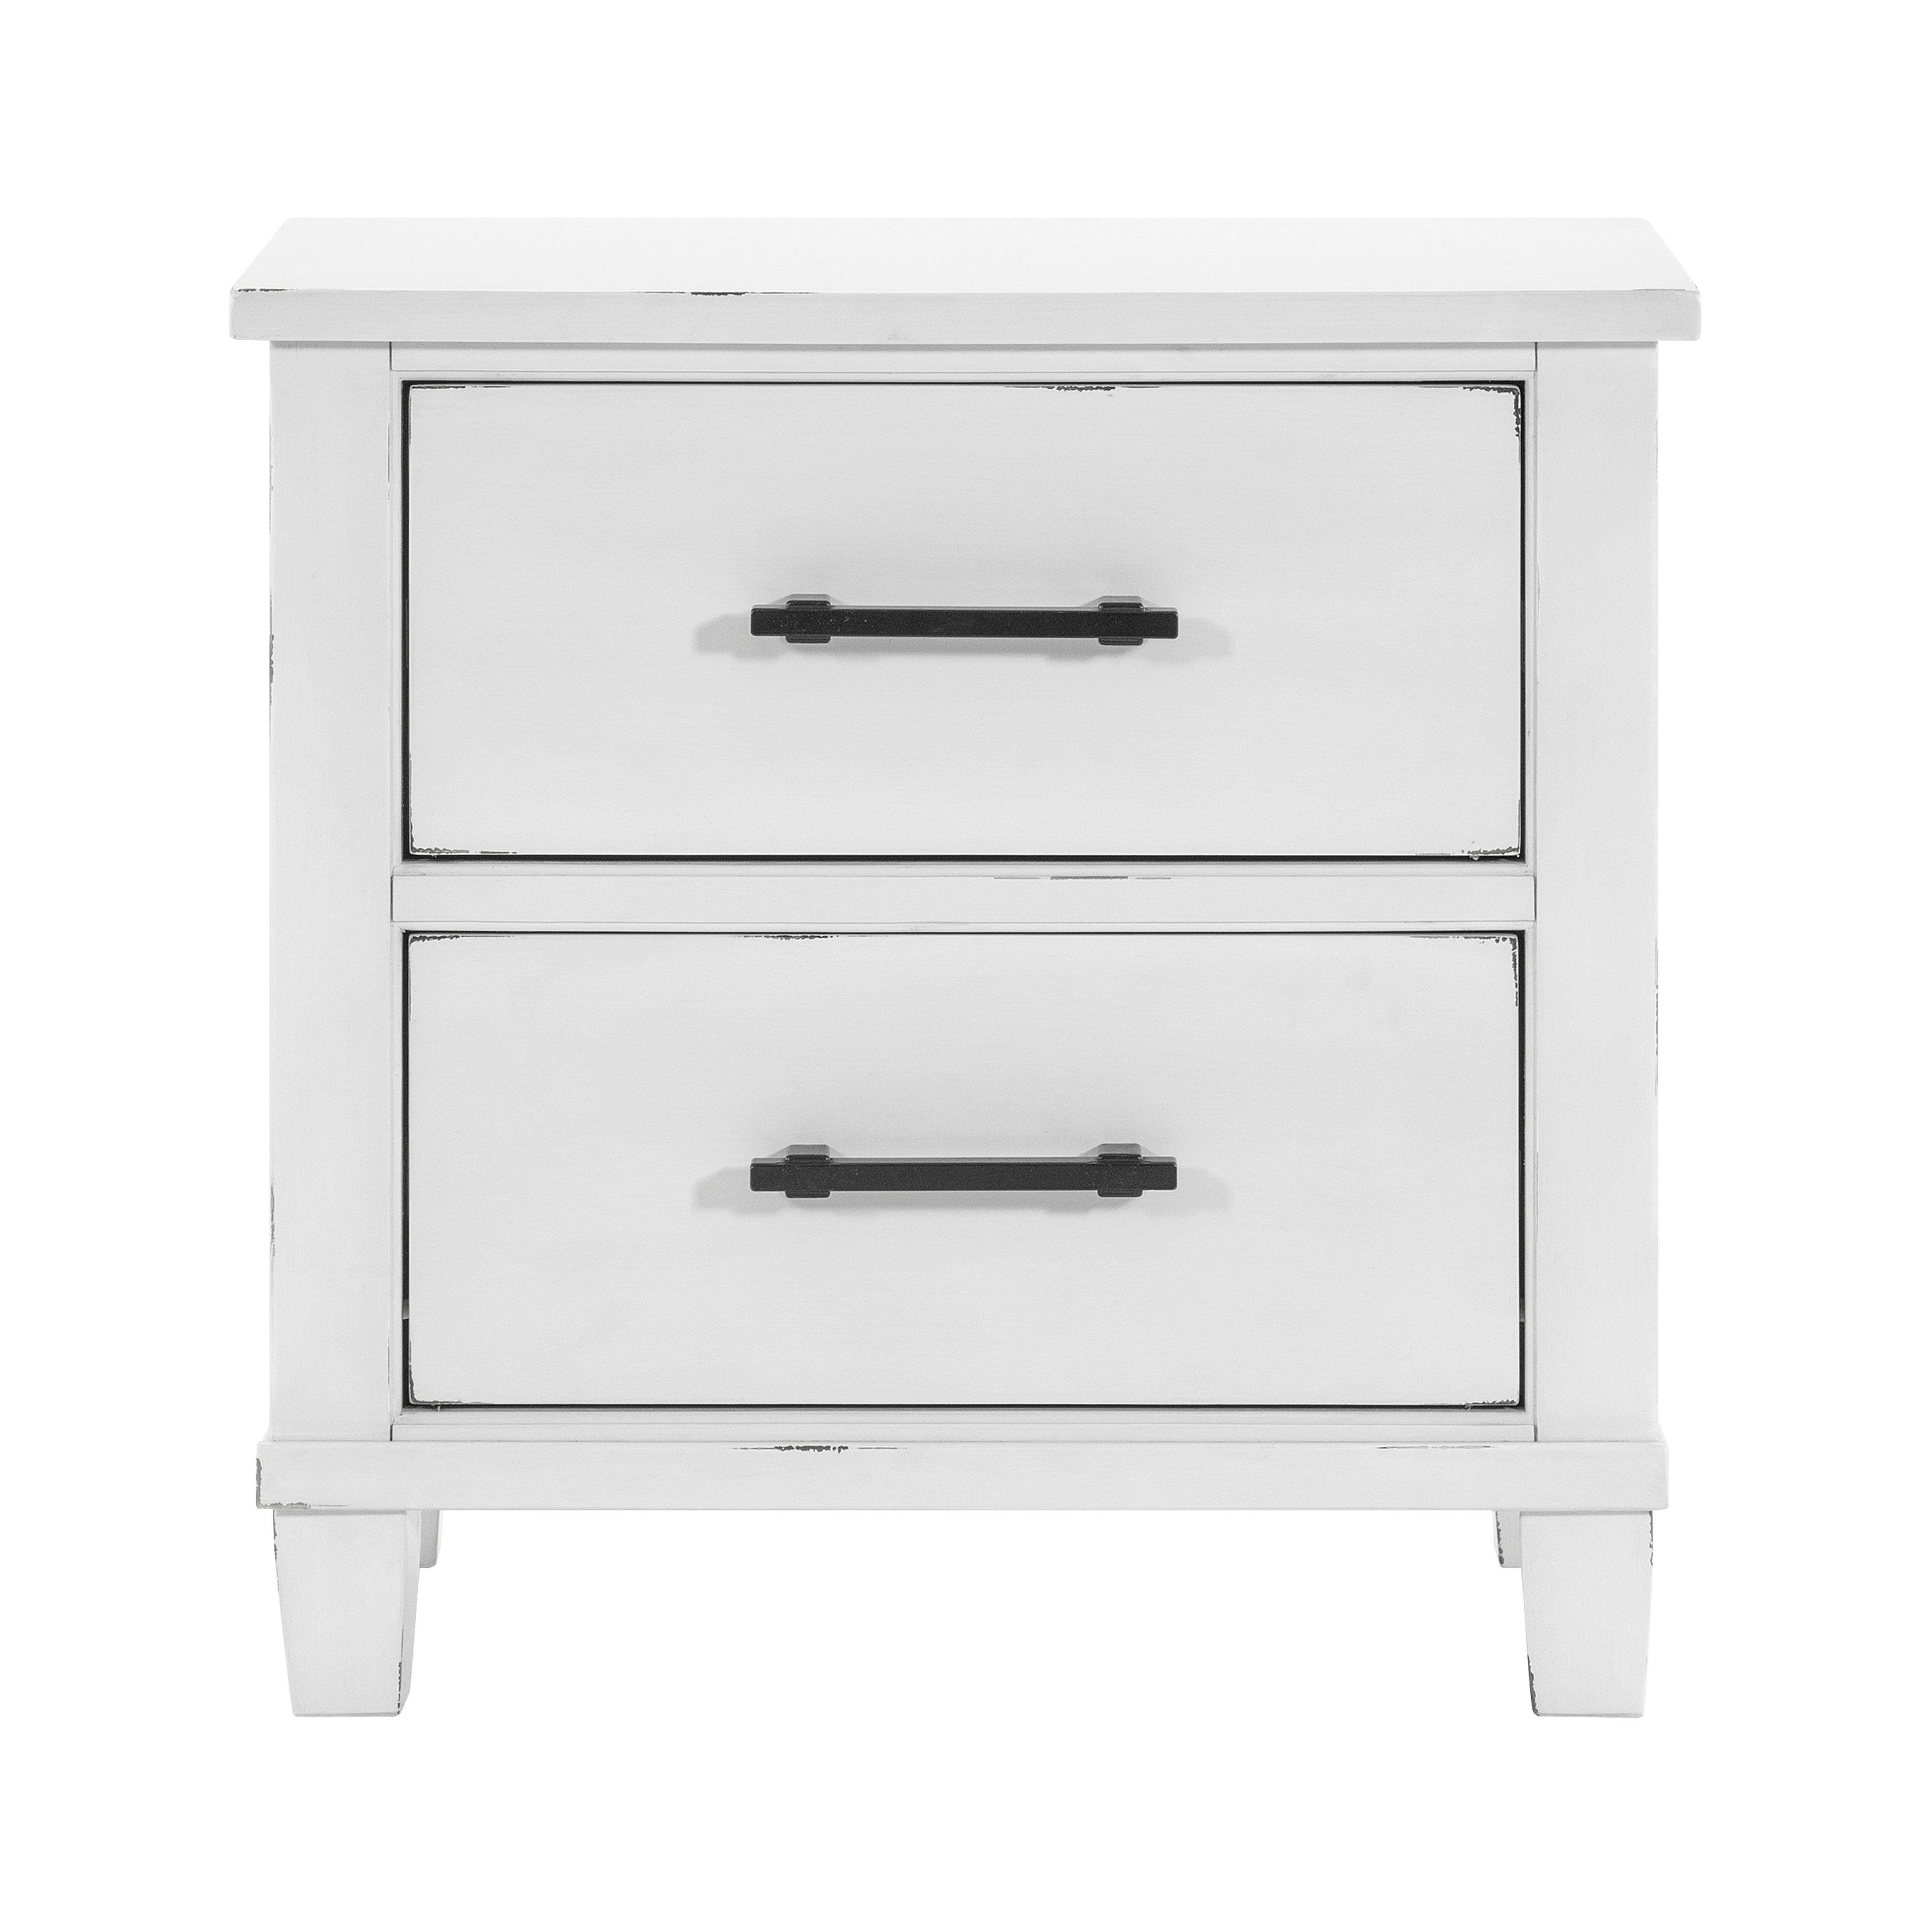 Cottage Nightstand Laurelville Collection Nightstand 1447-4-N 1447-4-N in Antique White 